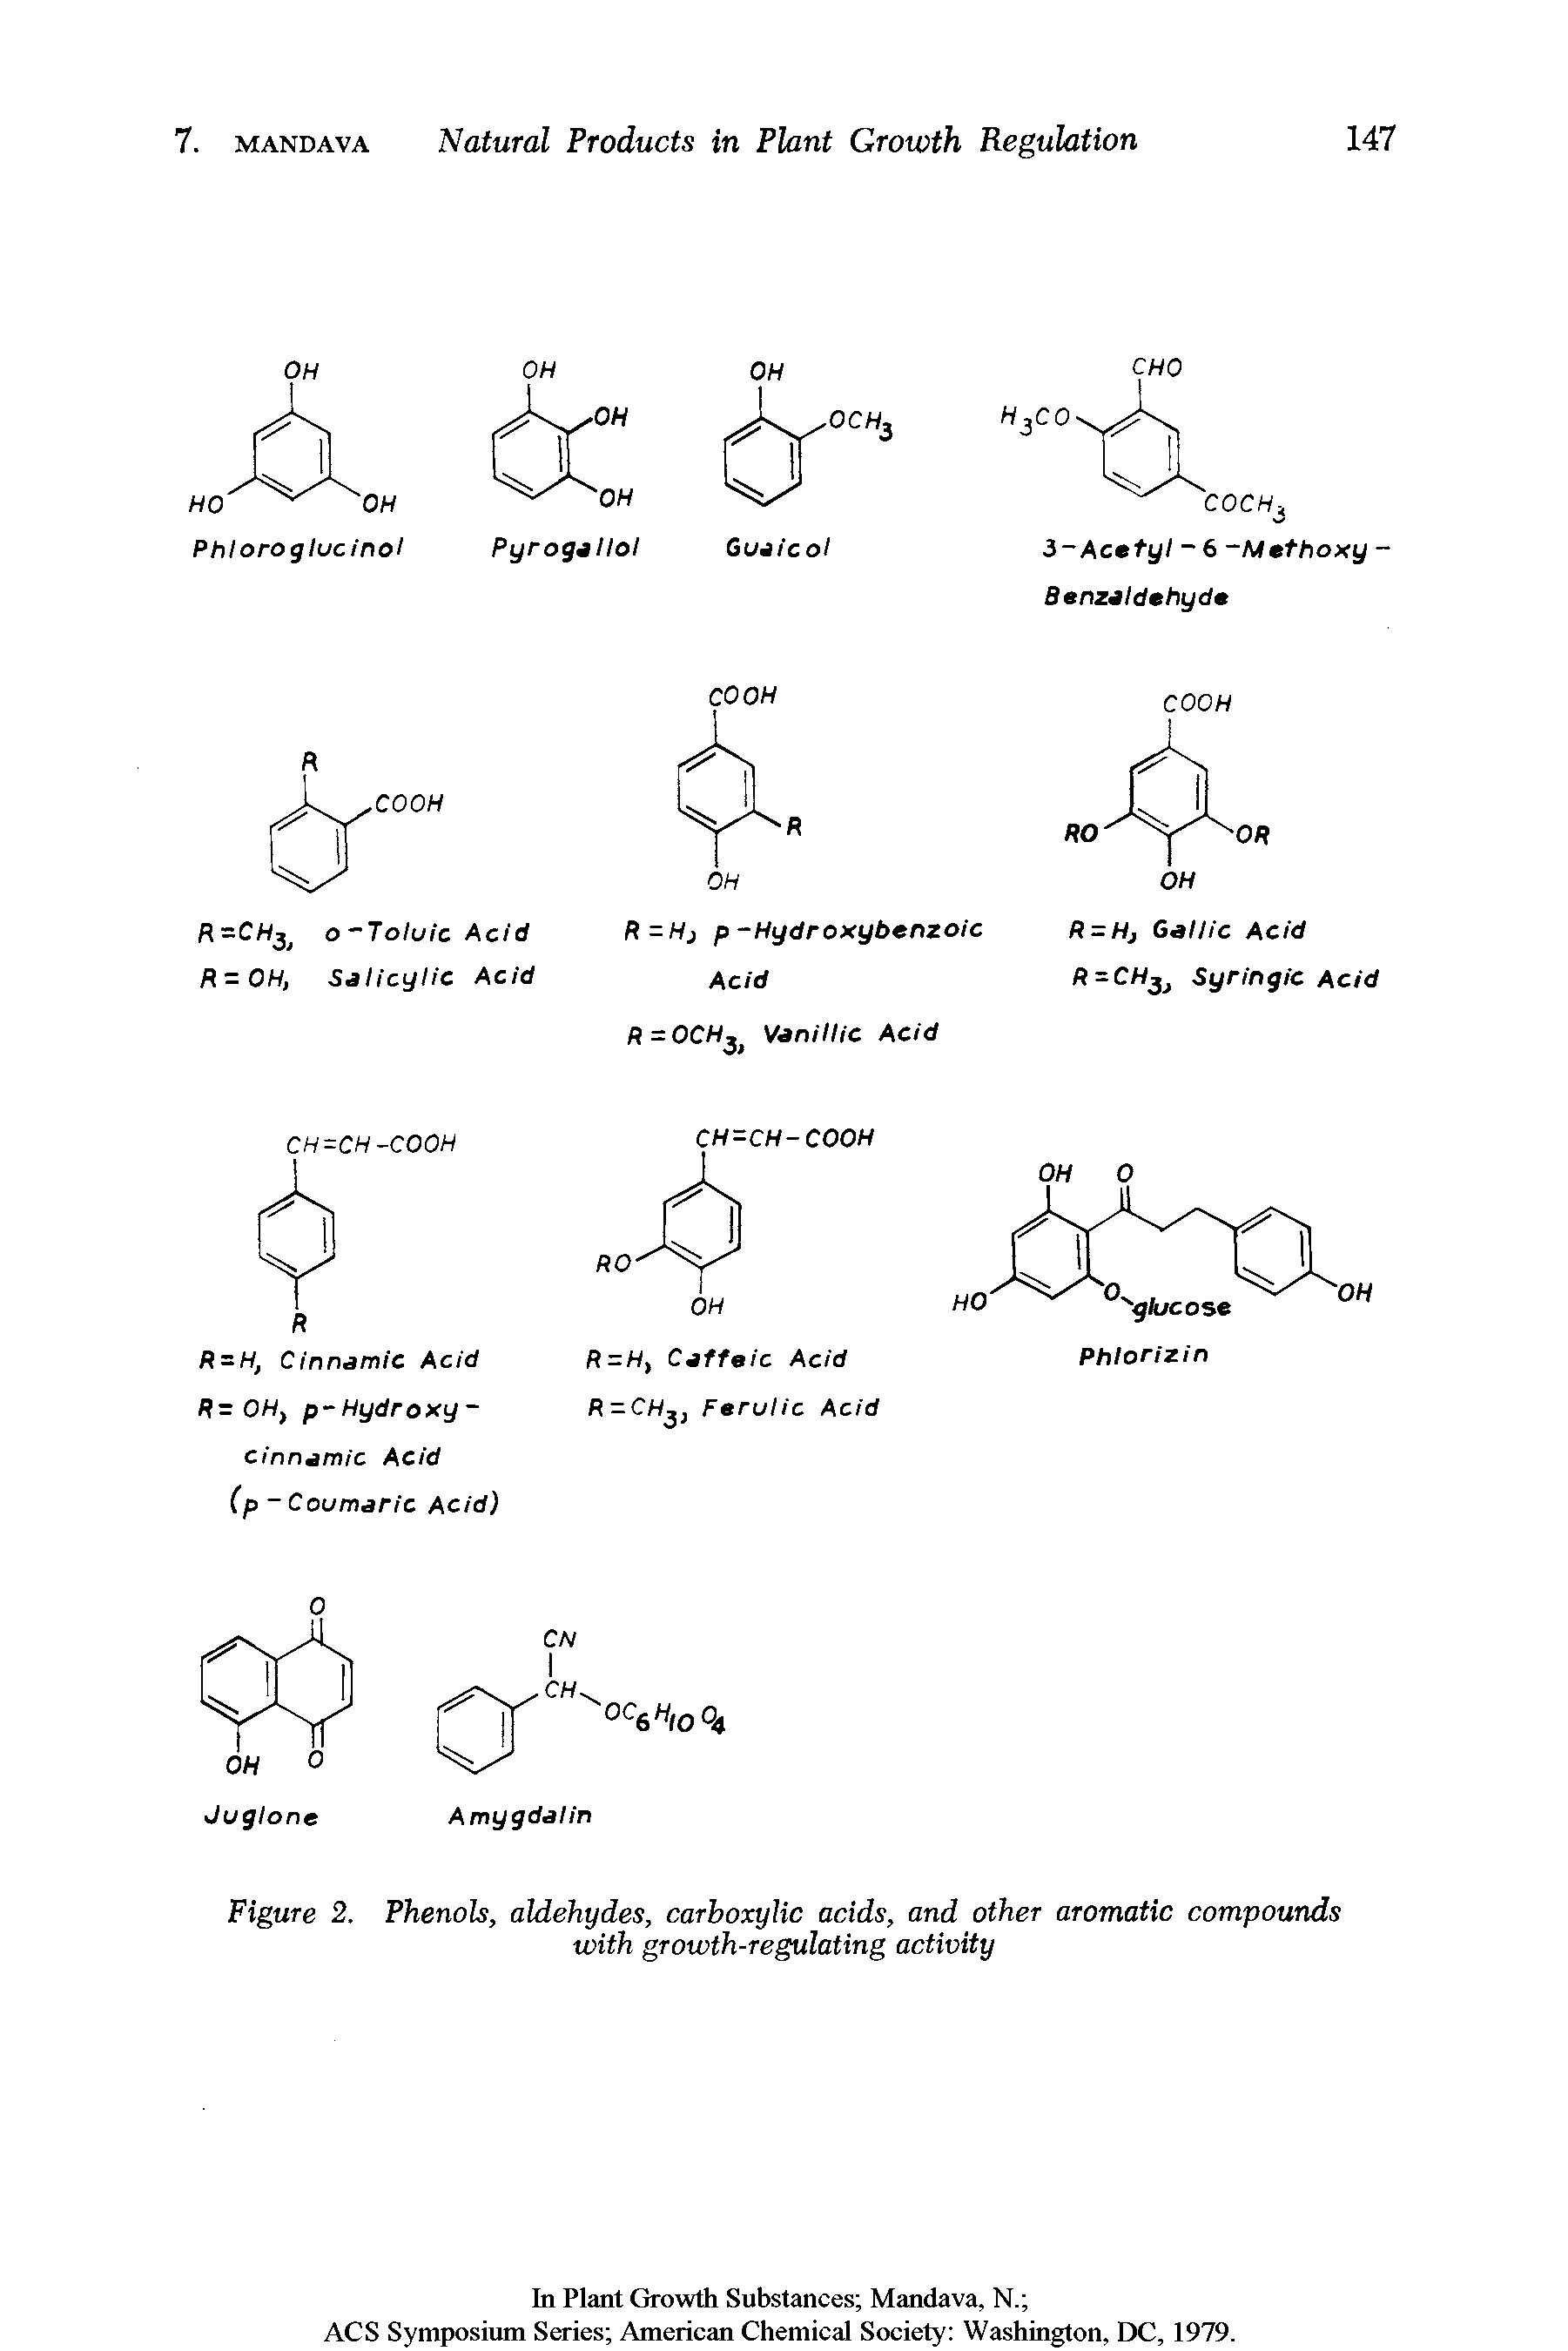 Figure 2, Phenols, aldehydes, carboxylic acids, and other aromatic compounds with growth-regulating activity...